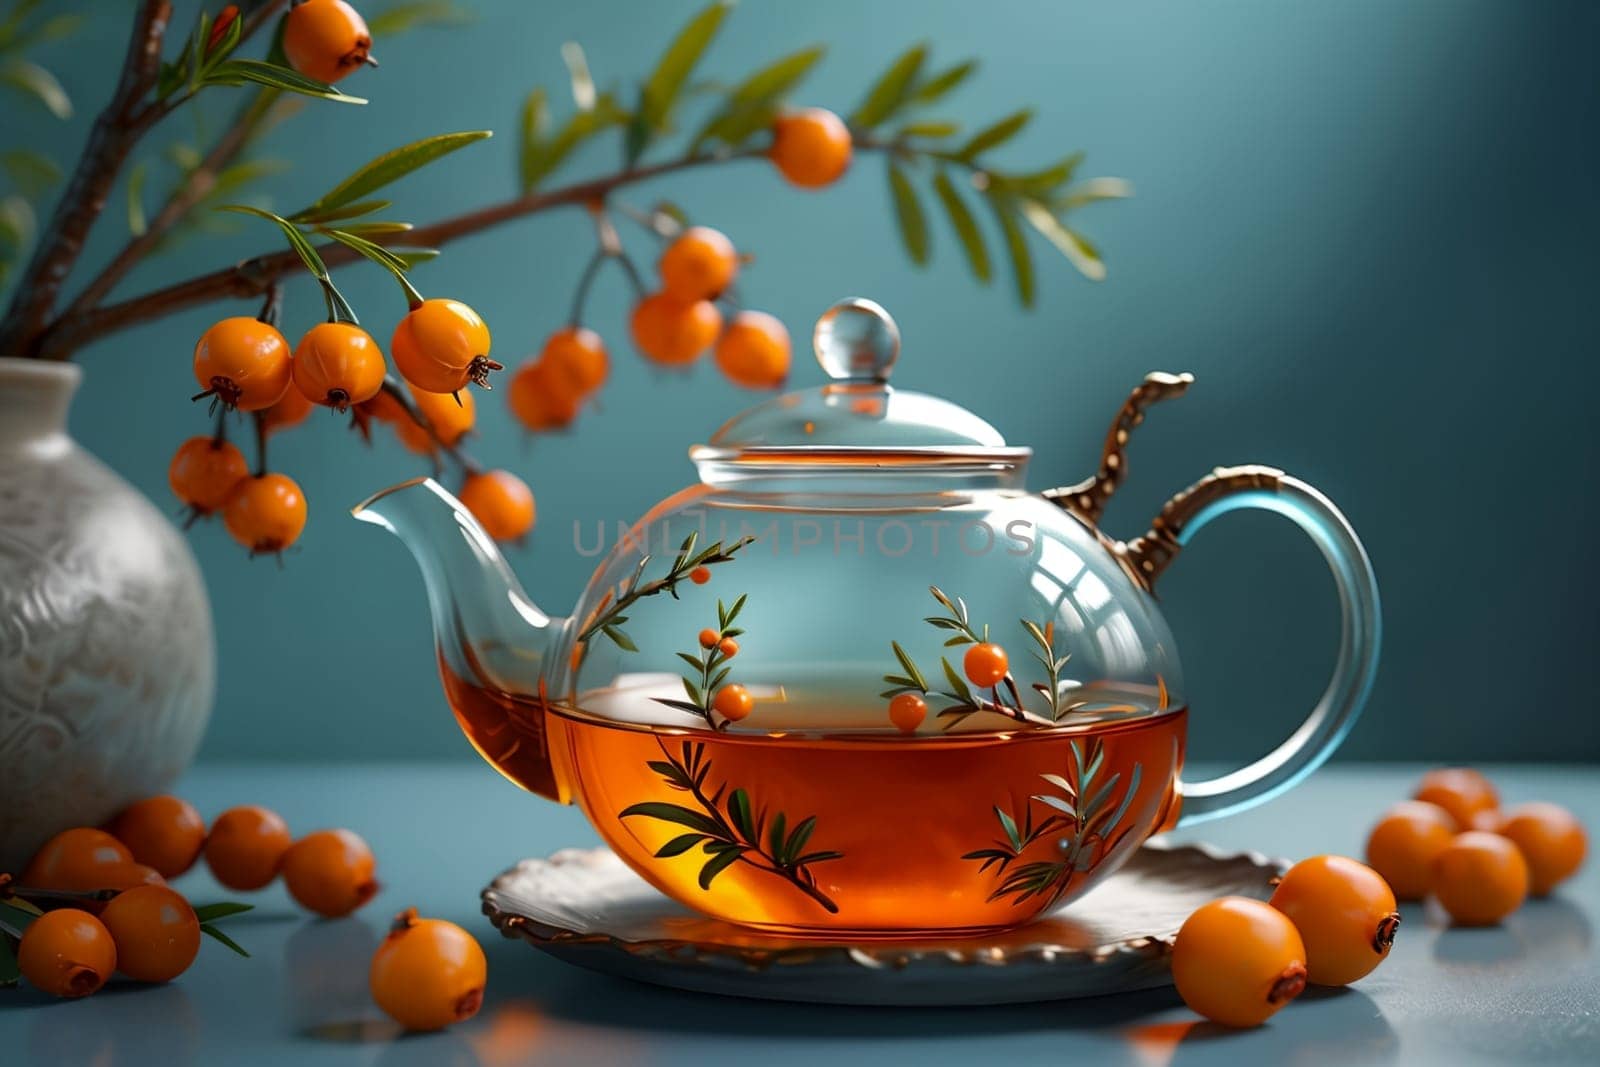 sea buckthorn tea in a glass teapot isolated on a blue background .